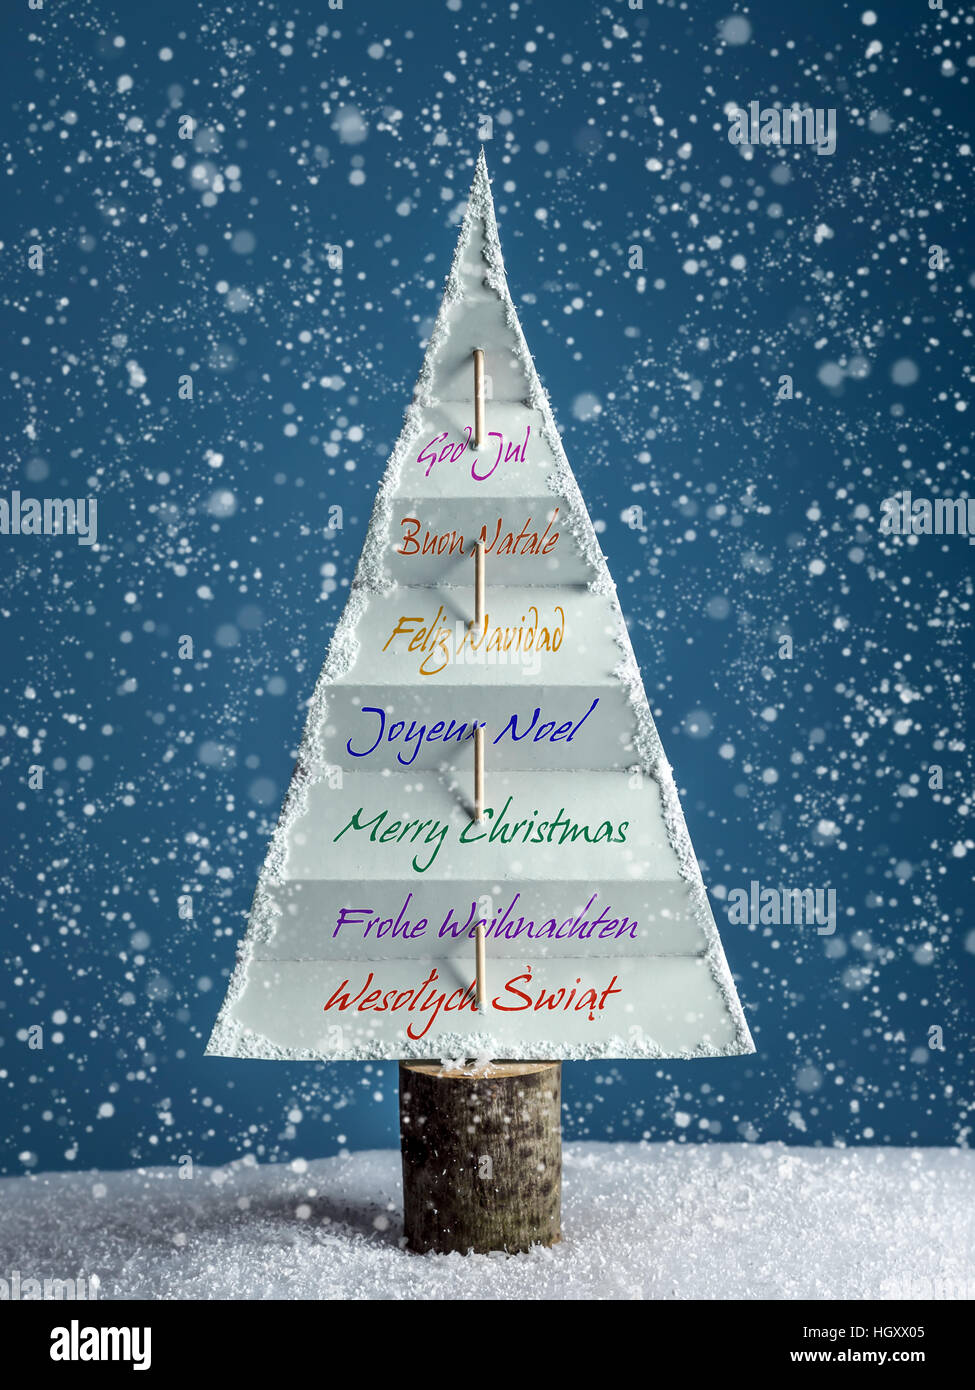 Paper christmas tree with International seasonal greetings over dark blue background with snowing effect Stock Photo